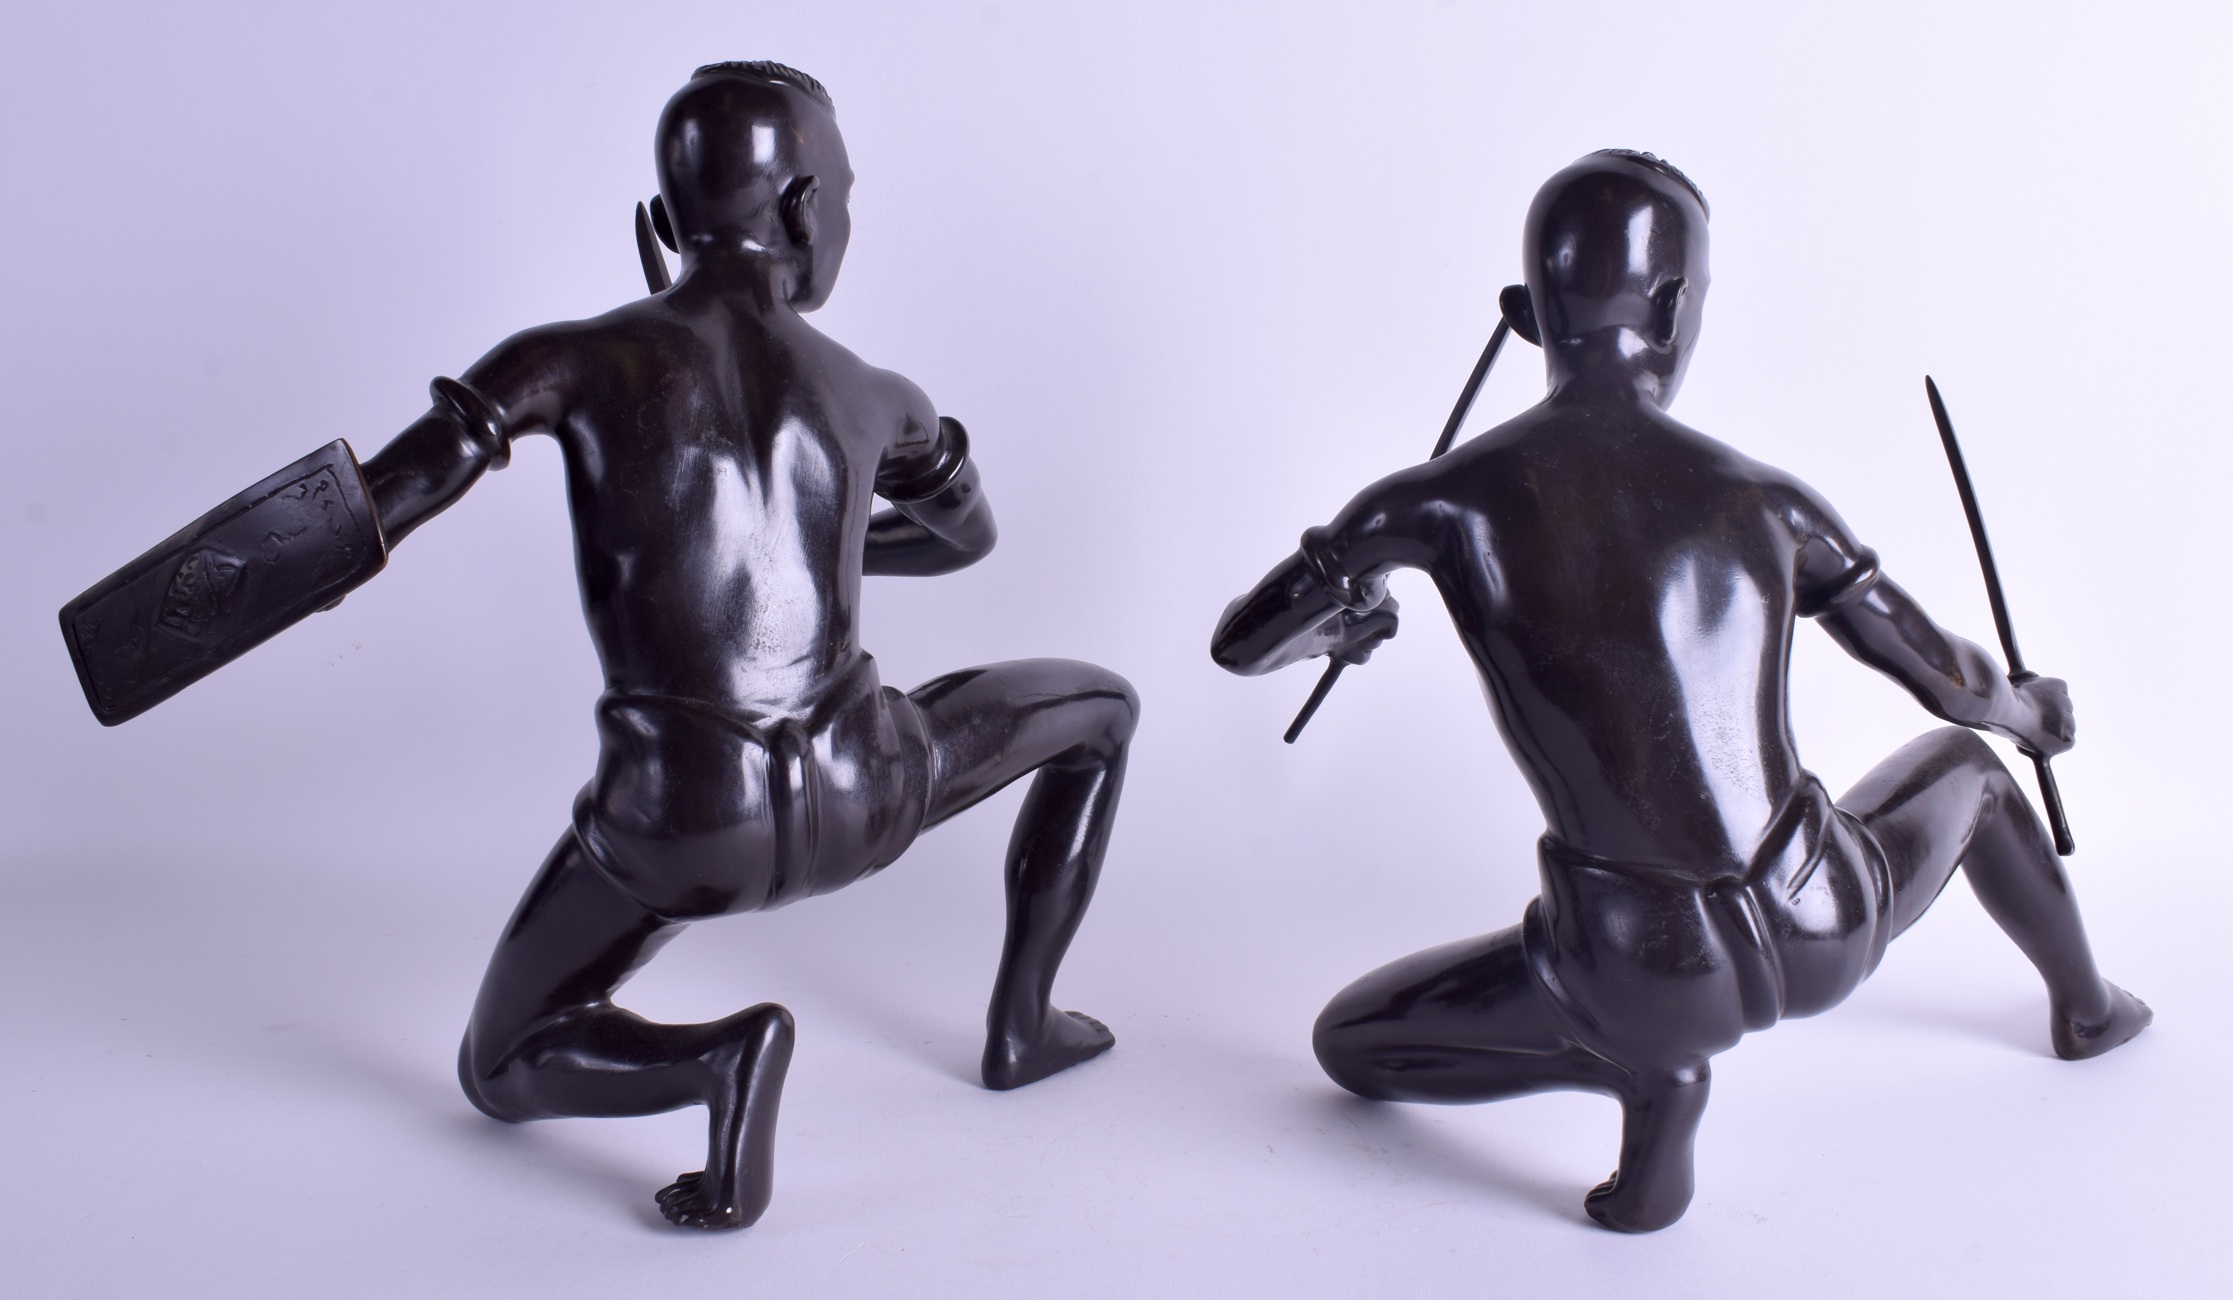 A PAIR OF EARLY 20TH CENTURY SOUTH EAST ASIAN BRONZE FIGURES OF WARRIORS modelled holding fighting s - Image 2 of 3